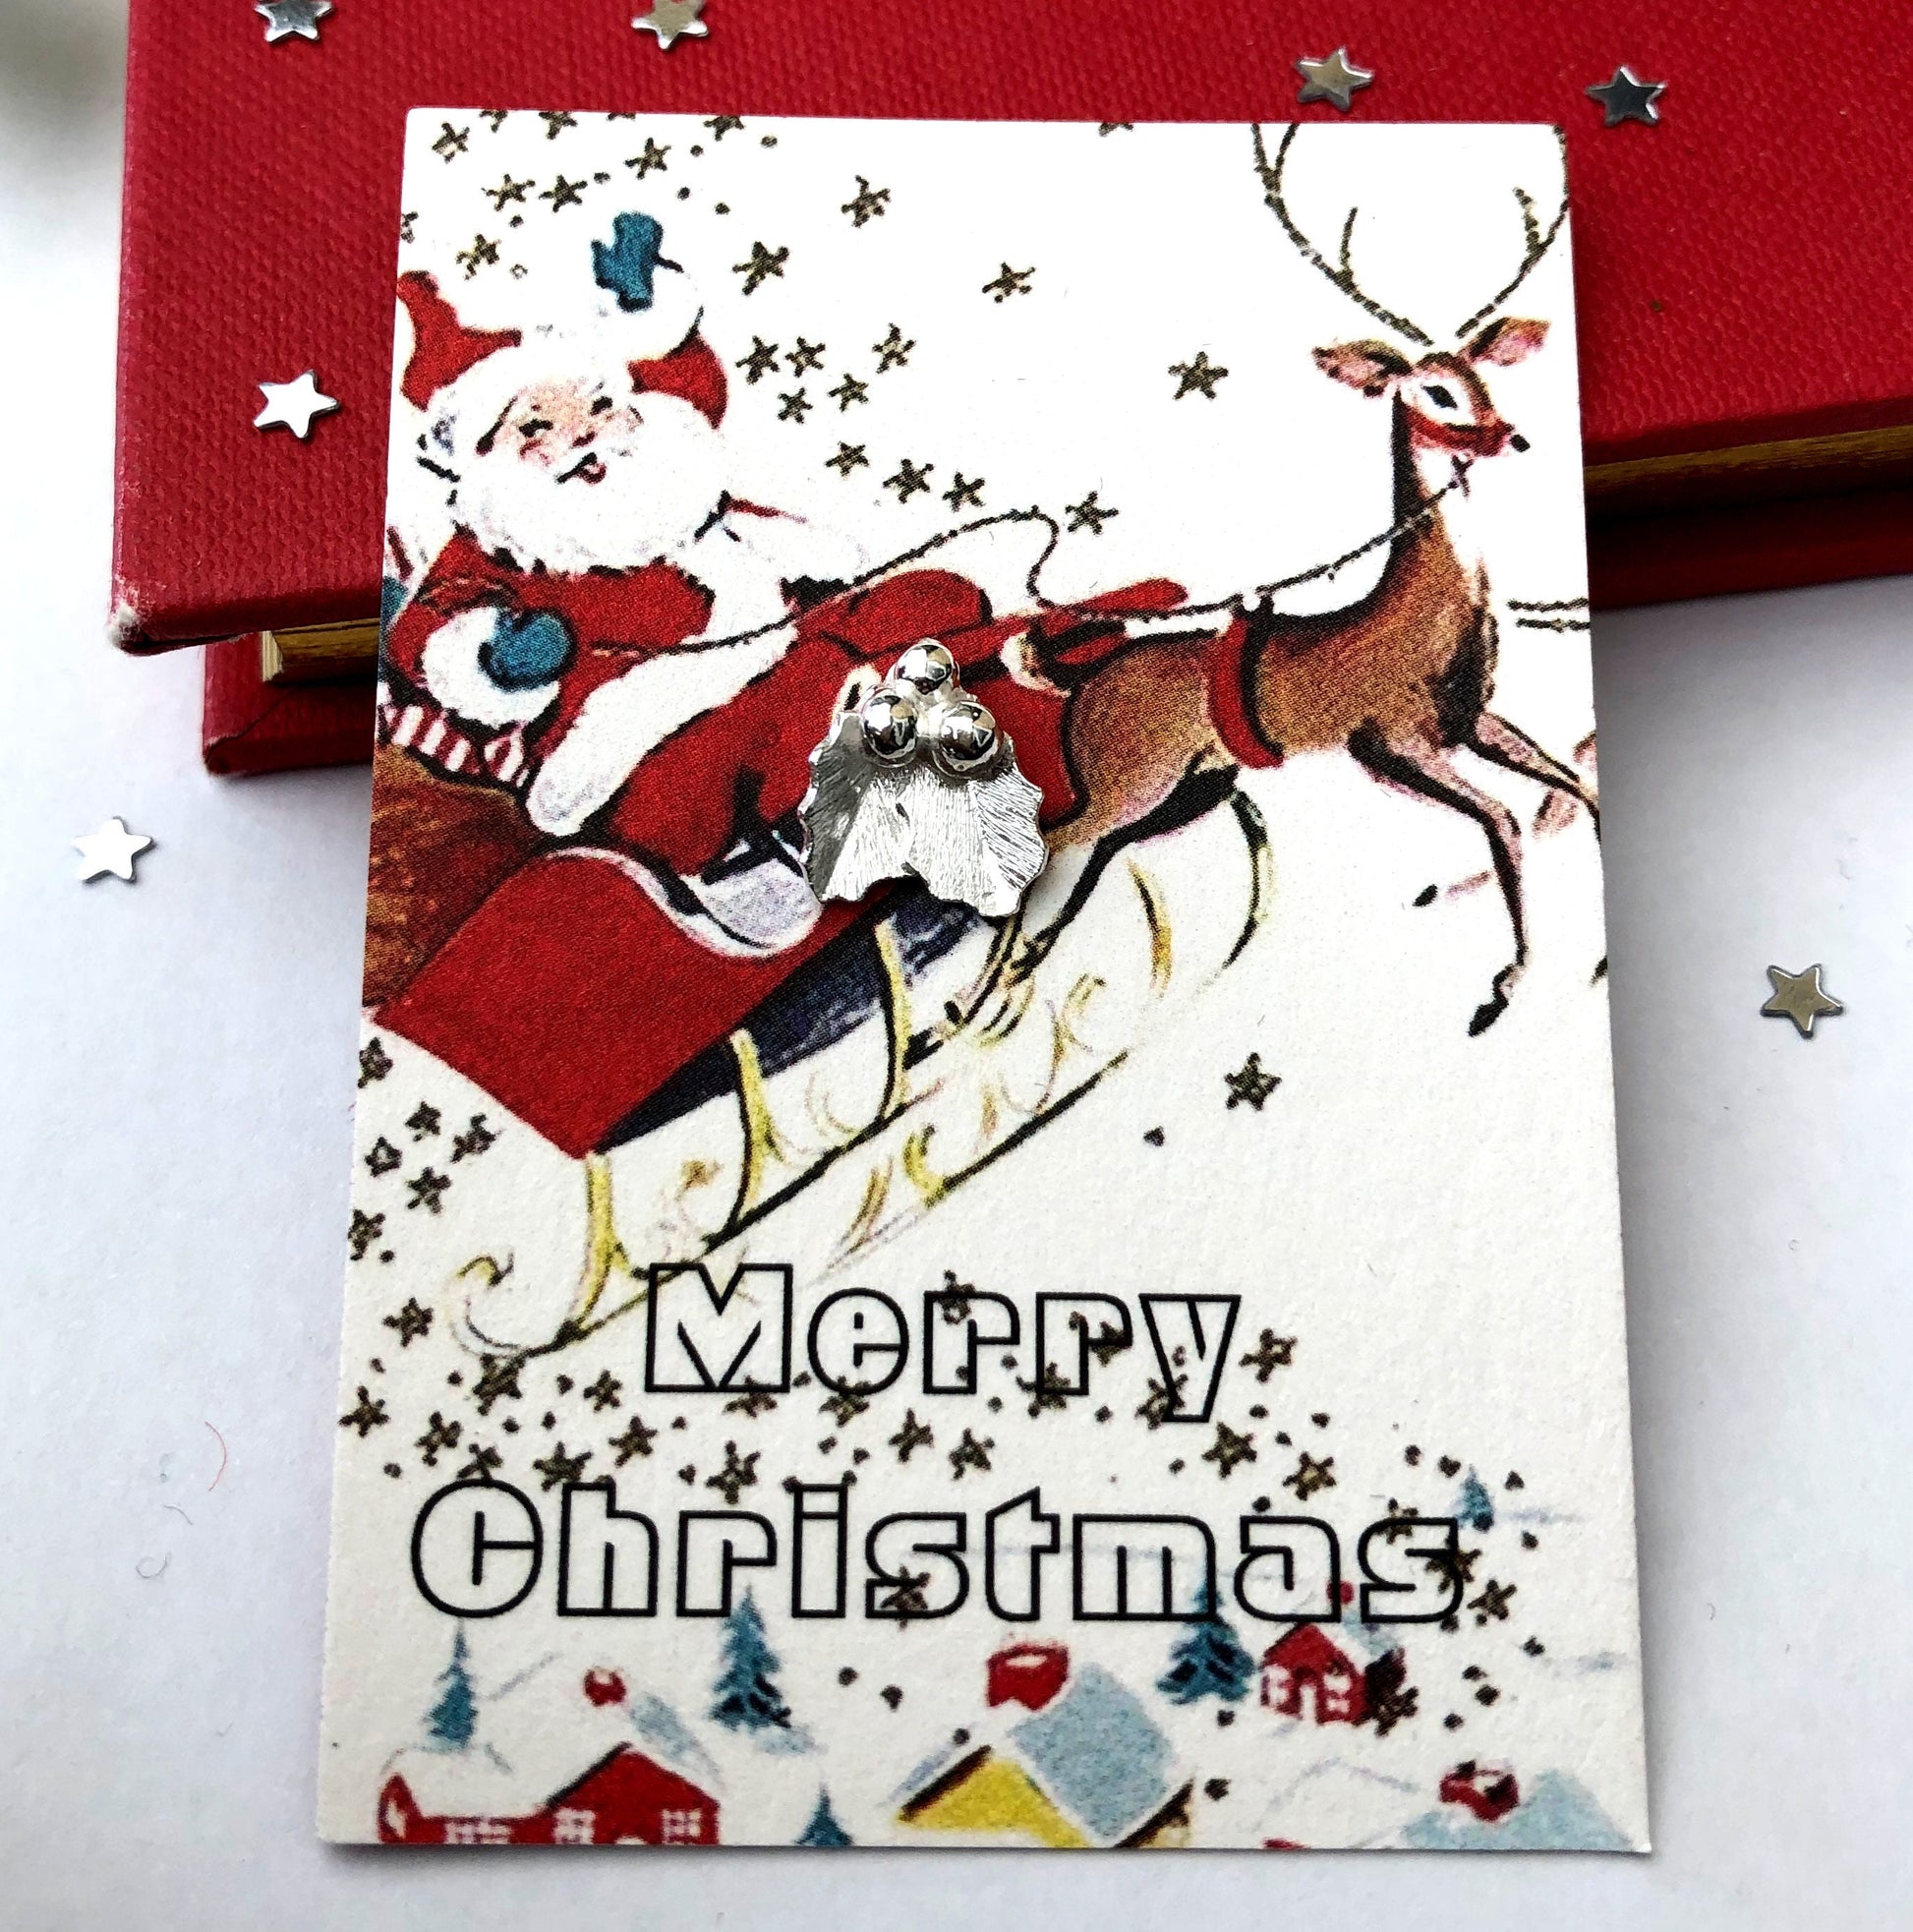 sterling silver pin brooch with Merry Christmas gift card